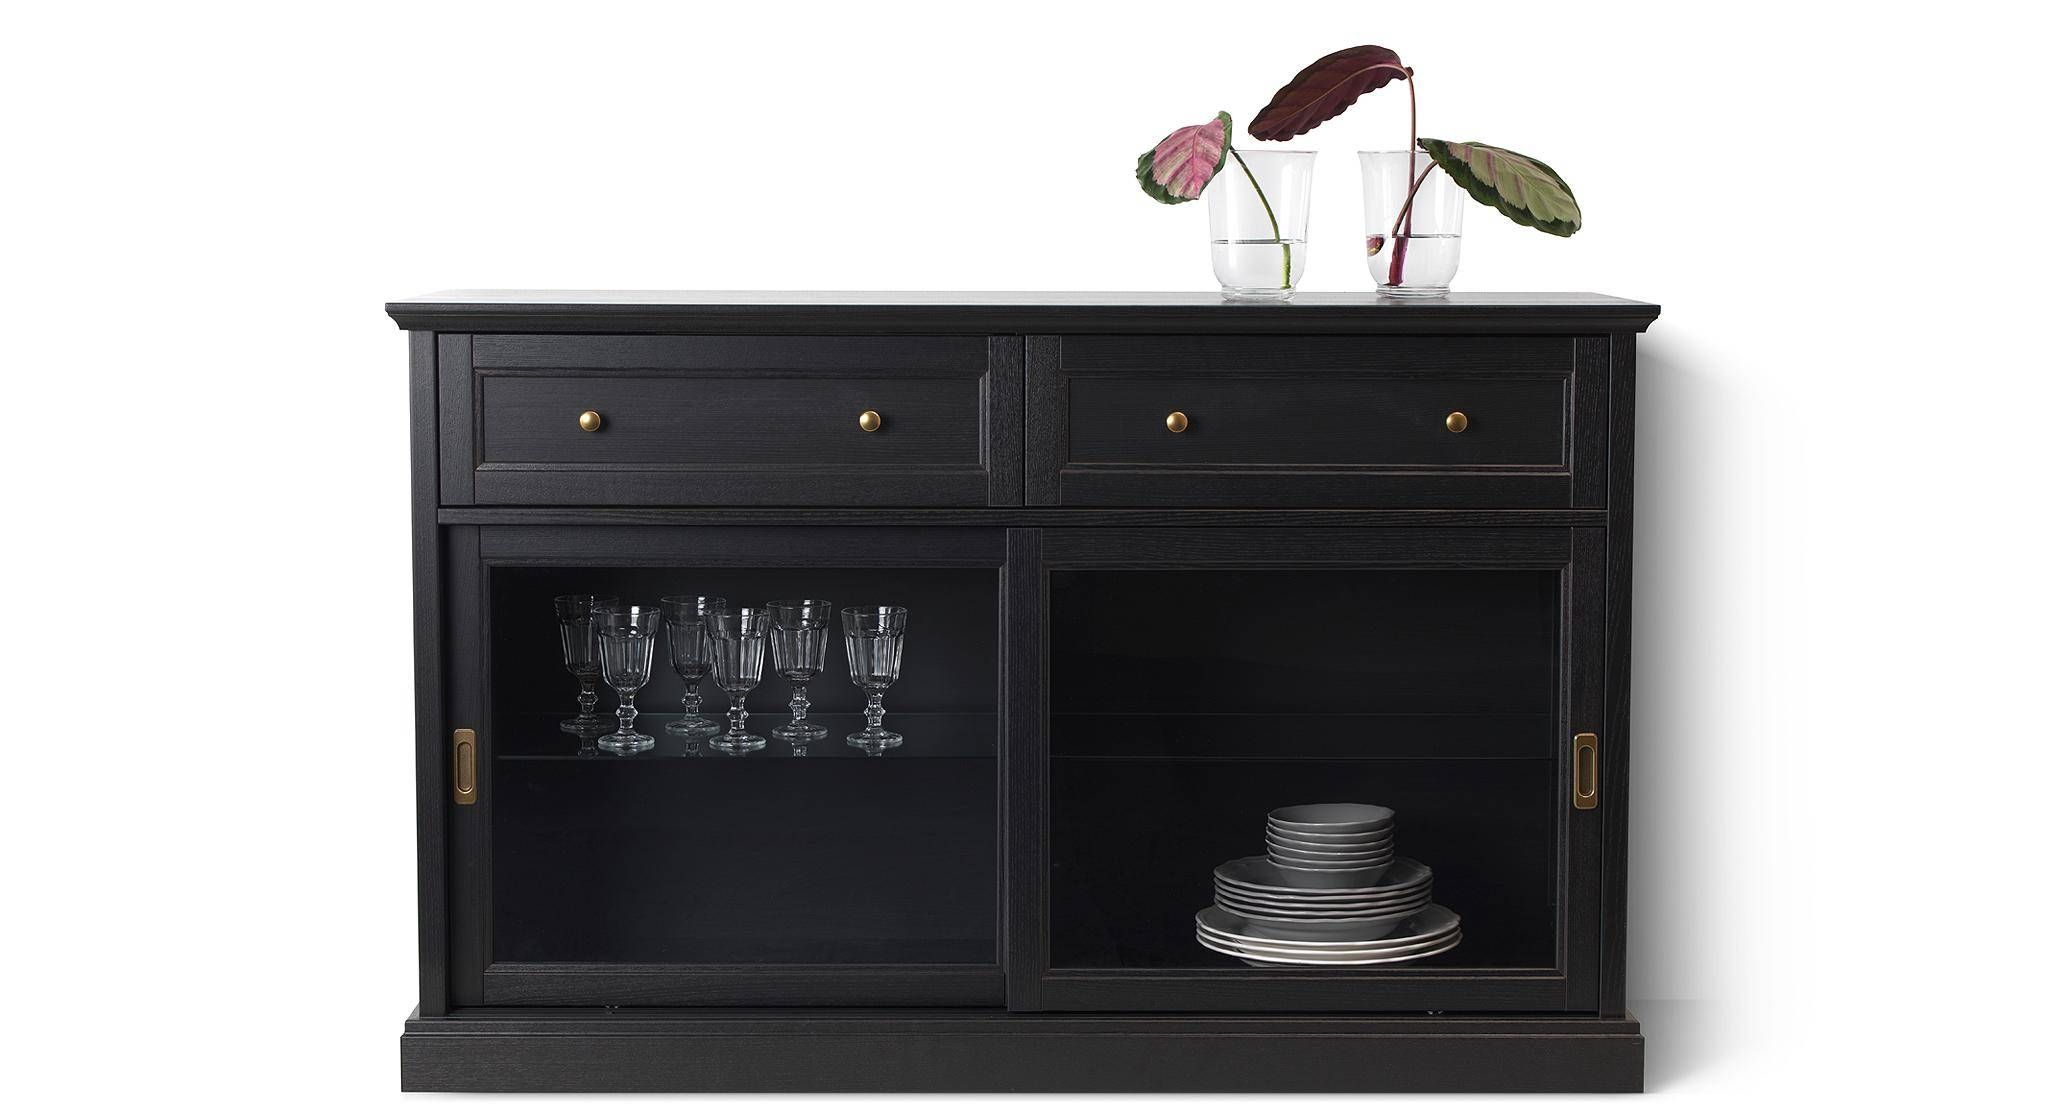 Sideboards & Buffet Cabinets | Ikea In Best And Newest Ikea Sideboards (View 15 of 15)